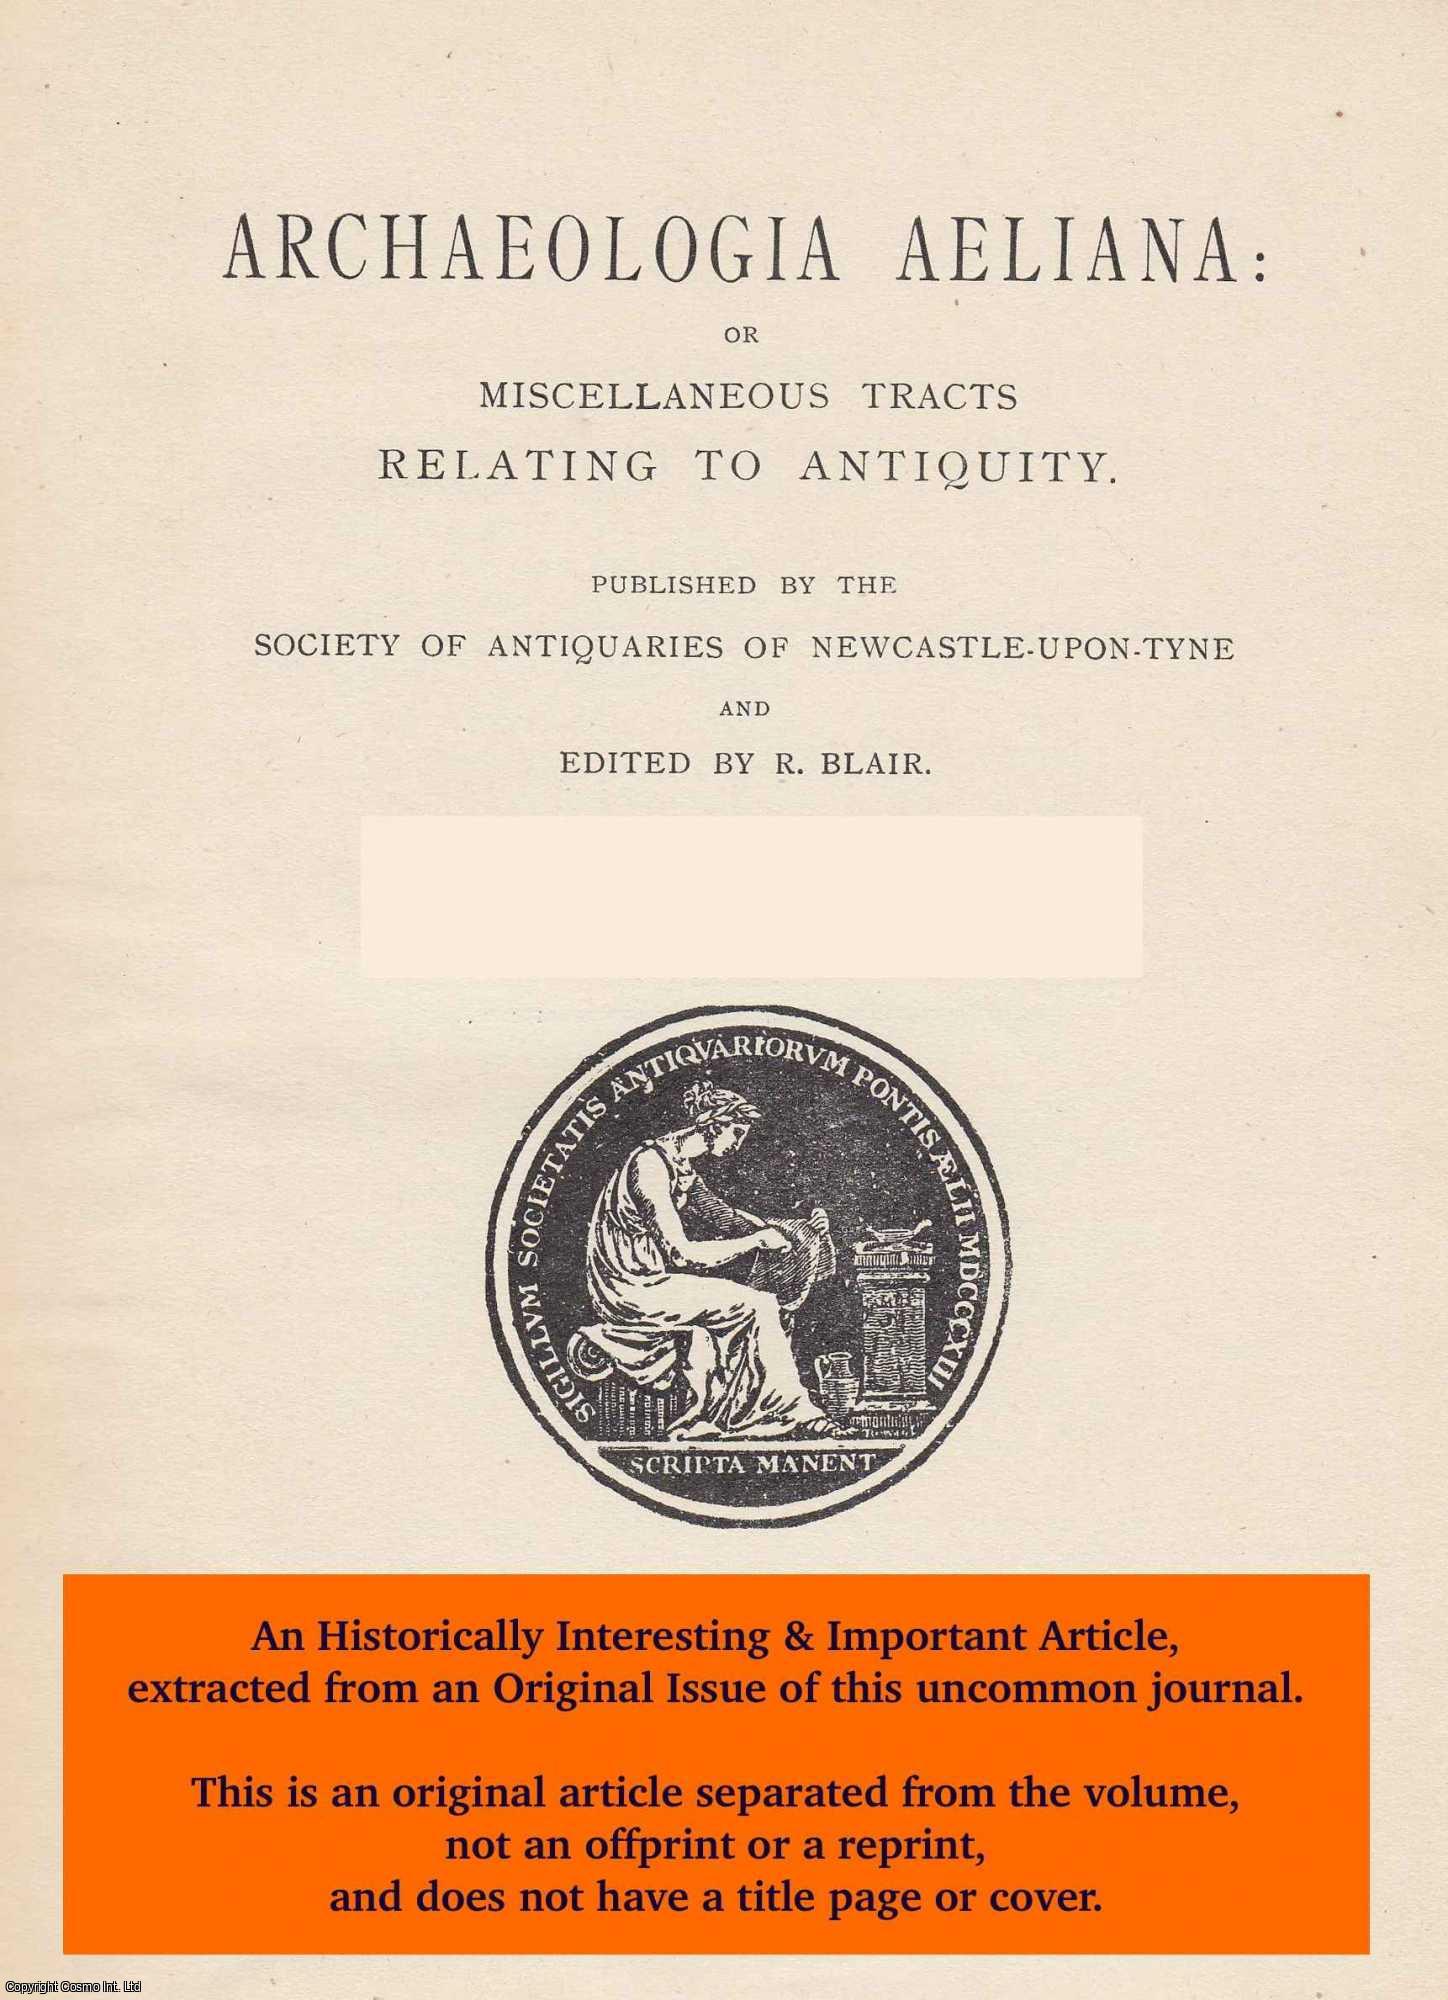 A. J. Lilburn - The Pipe Rolls of Edward I. An original article from The Archaeologia Aeliana: or Miscellaneous Tracts Relating to Antiquity, 1954.